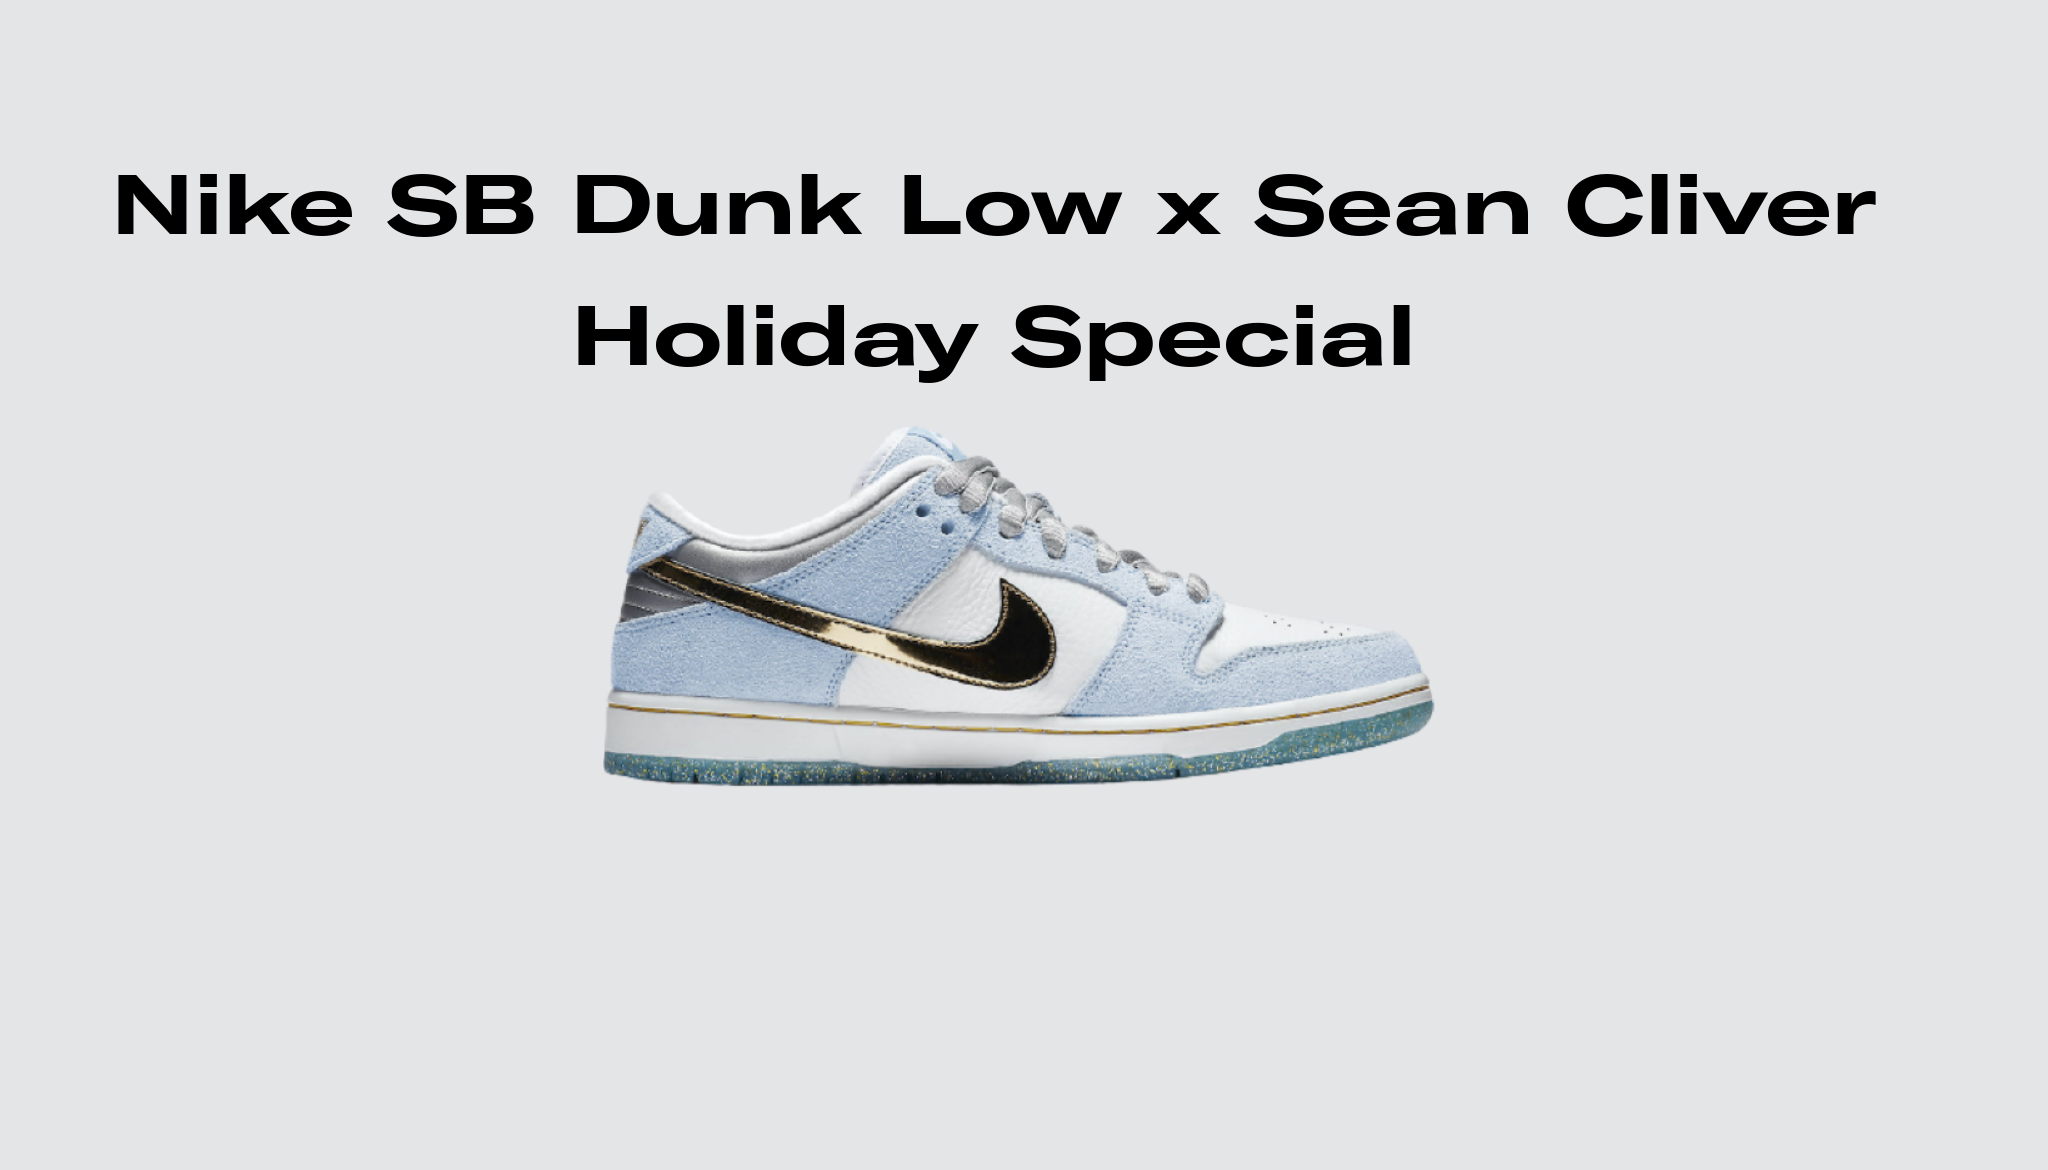 Nike SB Dunk Low x Sean Cliver Holiday Special, Raffles and